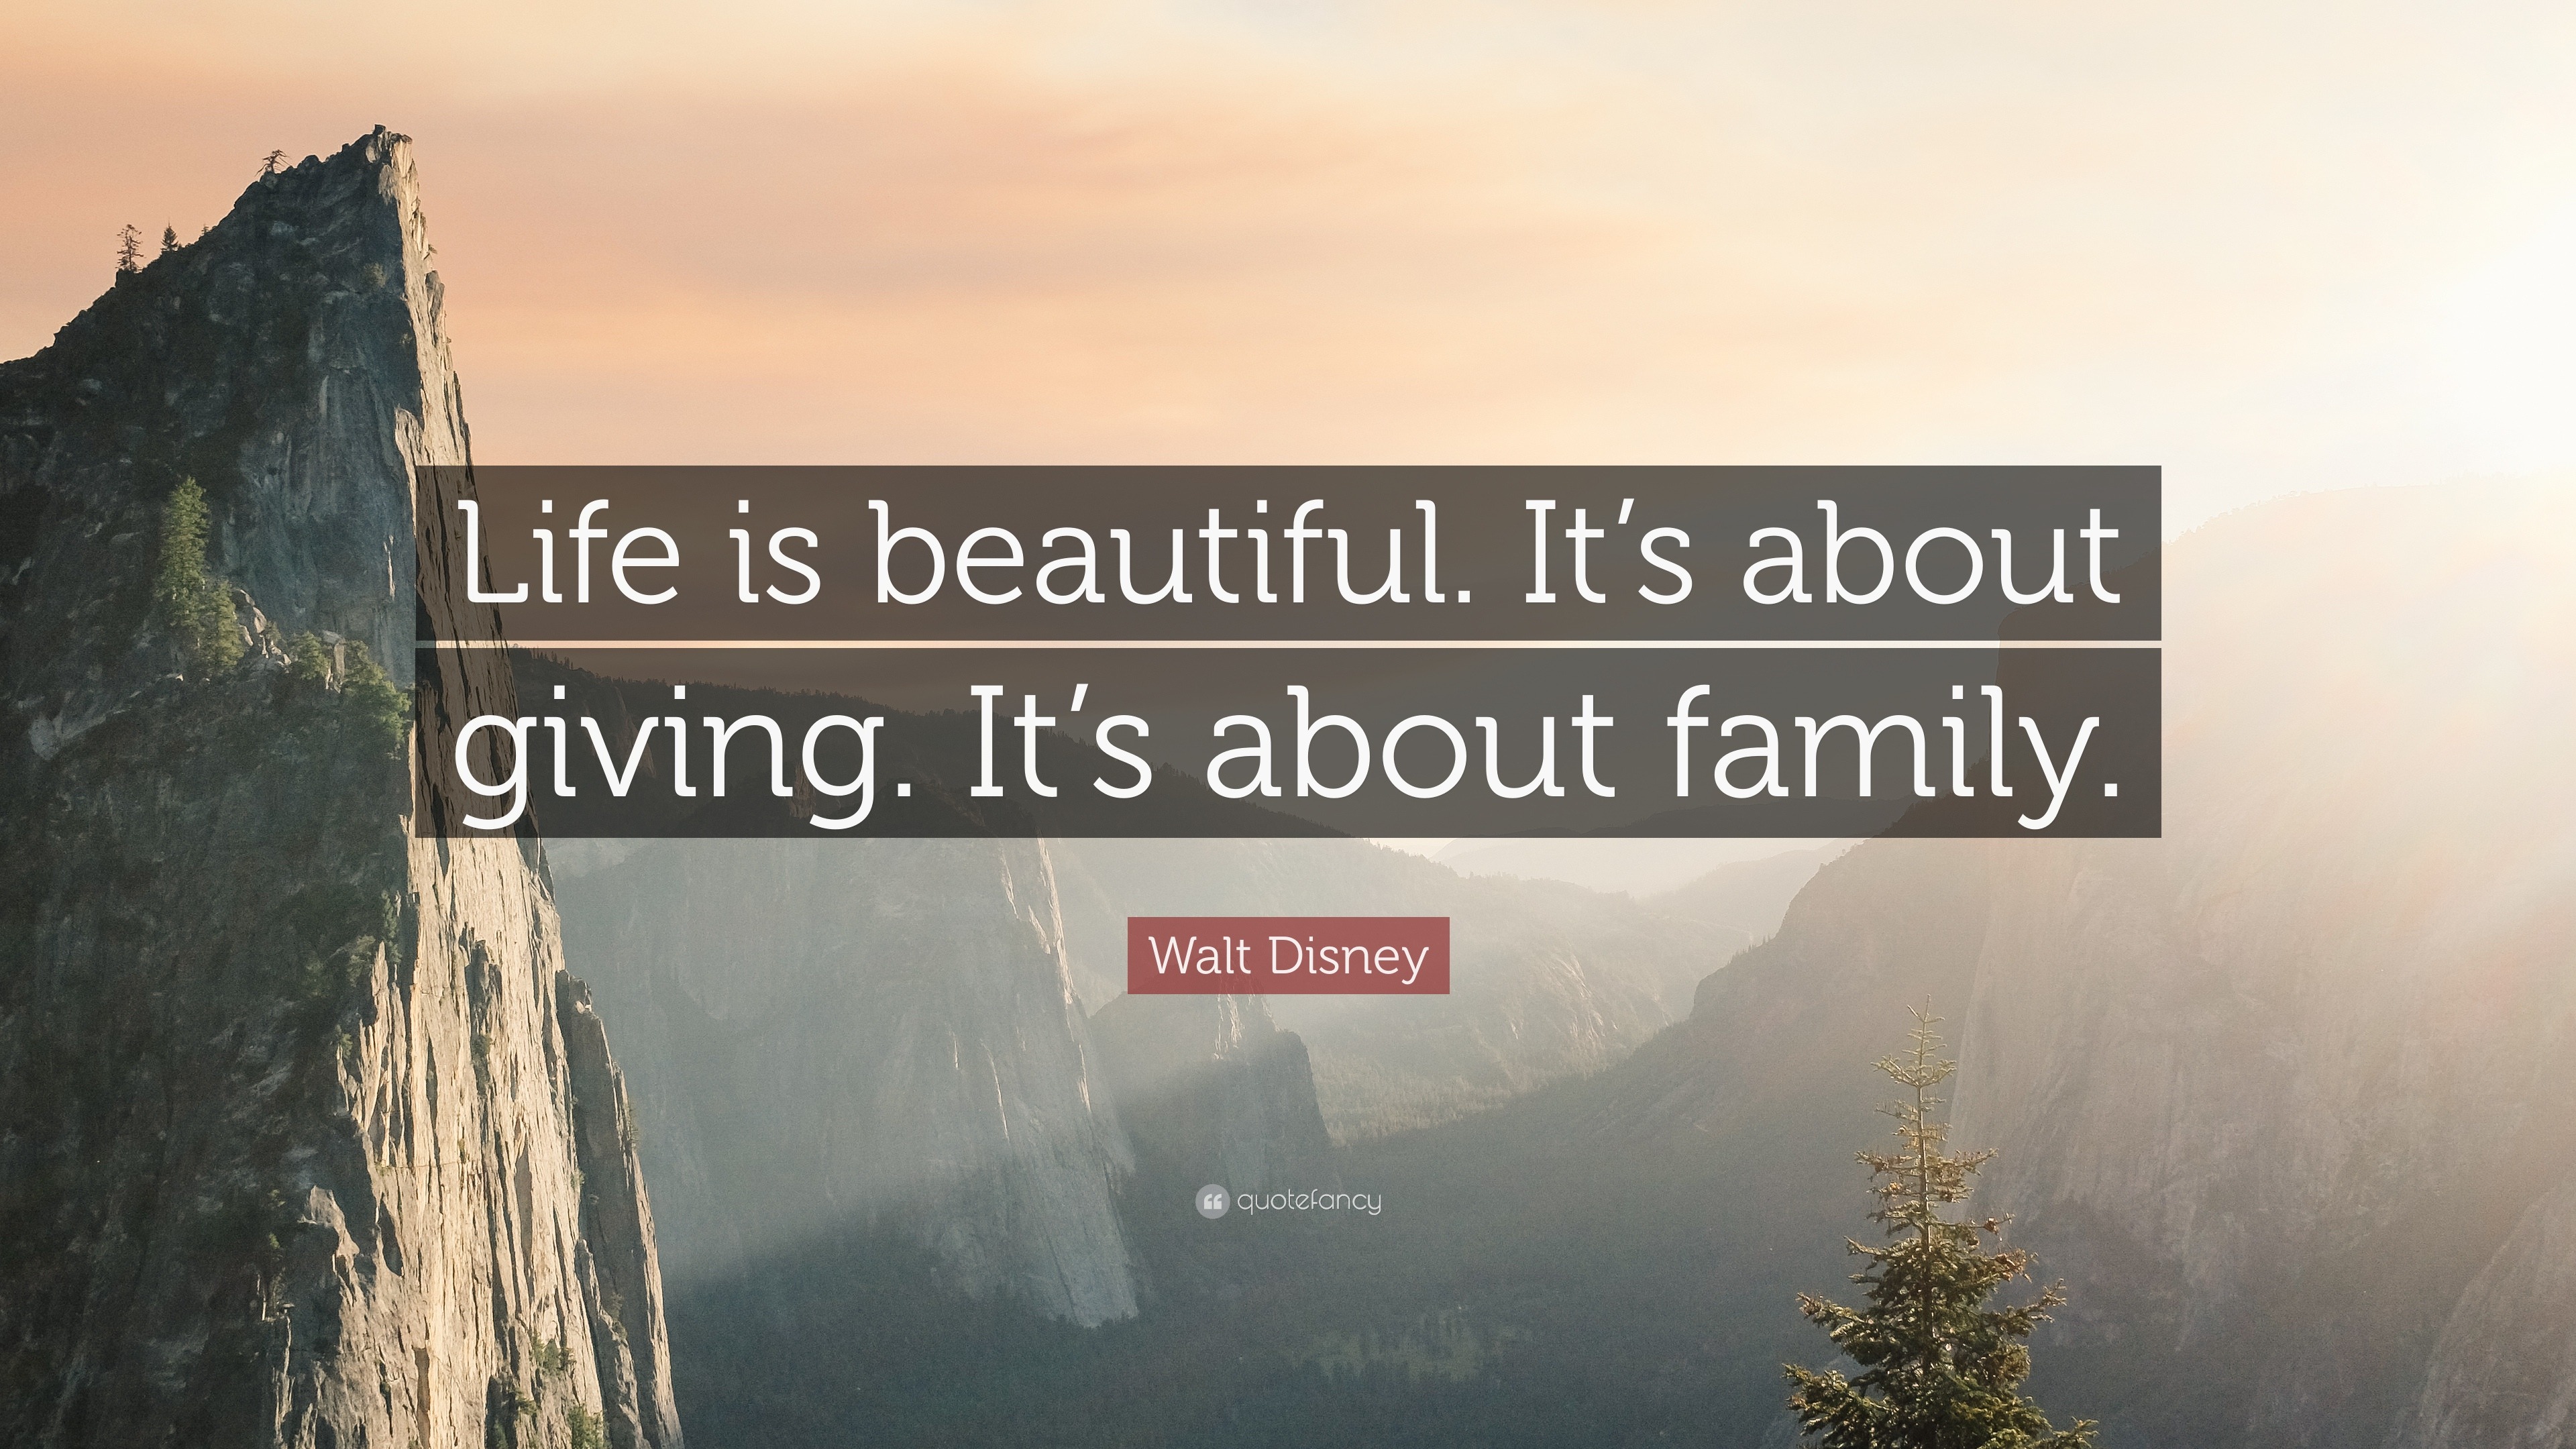 Walt Disney Quote “Life is beautiful. It’s about giving